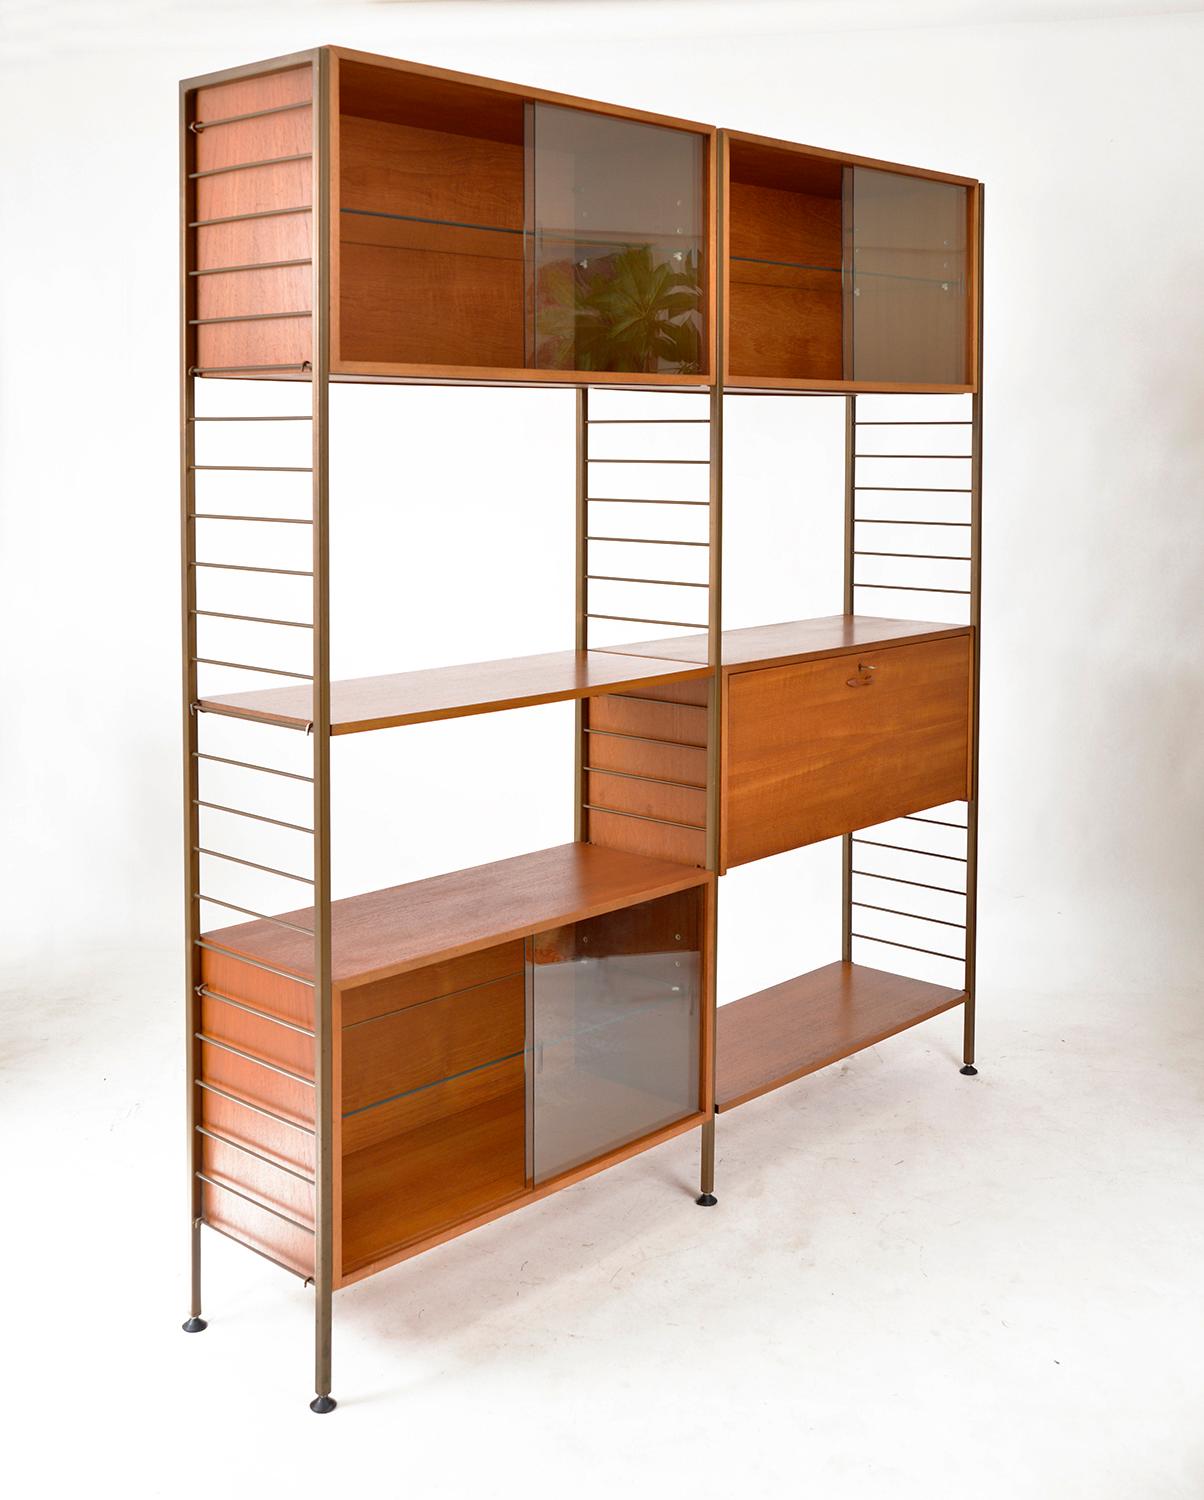 Double bay freestanding 1960s Ladderax shelving system in exceptional condition, having been well cared for over the years. Consisting of three teak boxes with adjustable glass shelves and glass sliding doors, one drop down bureau, and two shelves.